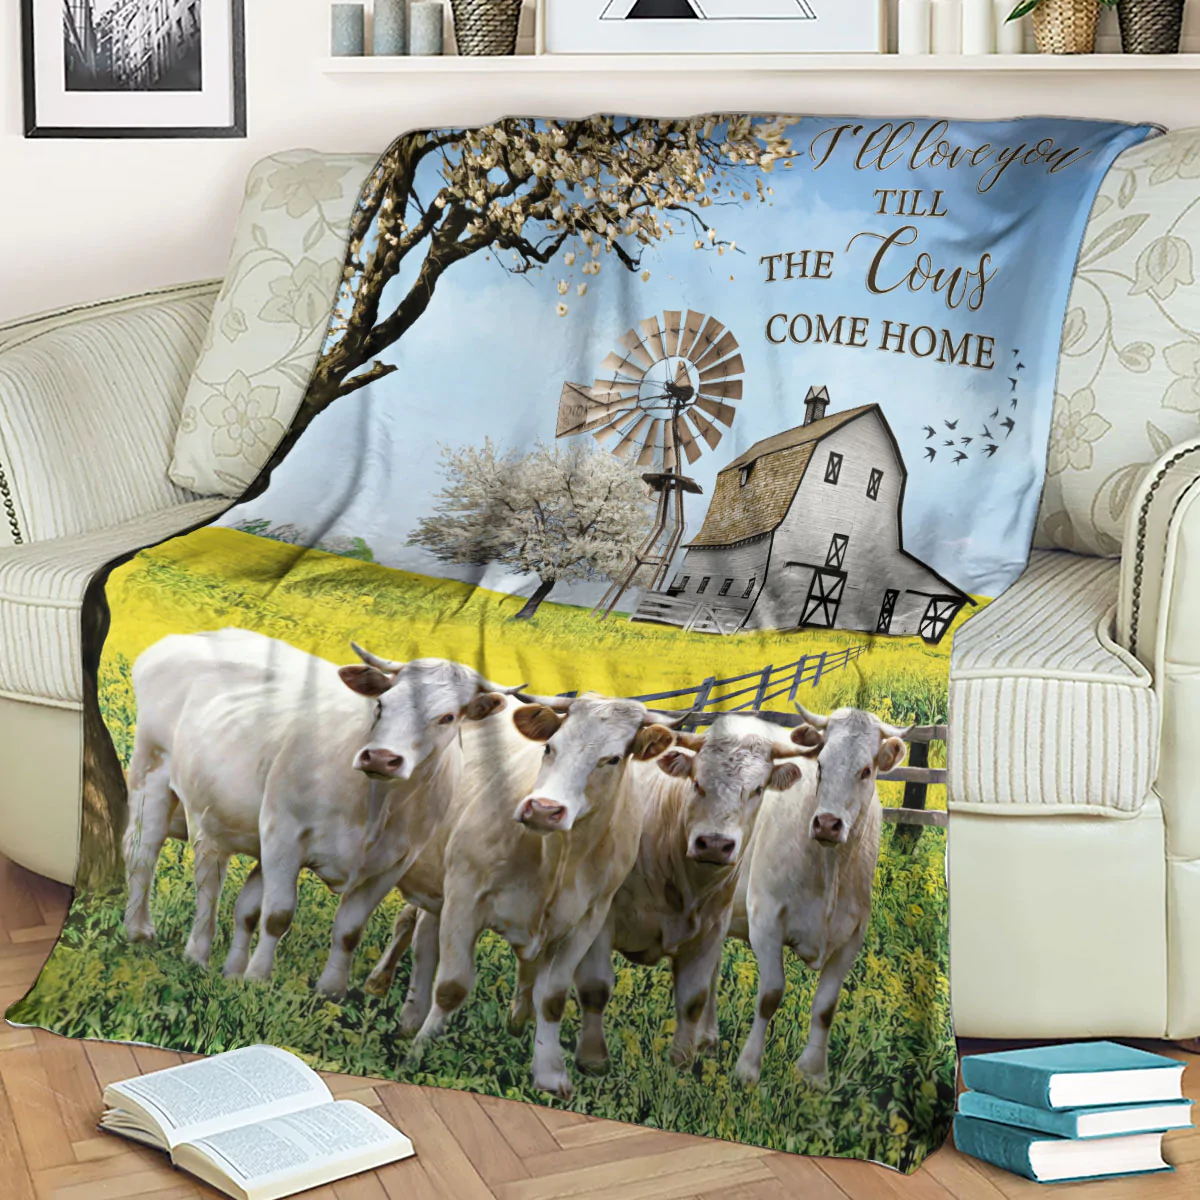 Charolais Cow Blanket/ Love You Till The Cows Come Home Blanket/ Farm Blanket/ Bedding Sofa Decoration For Farm Lover